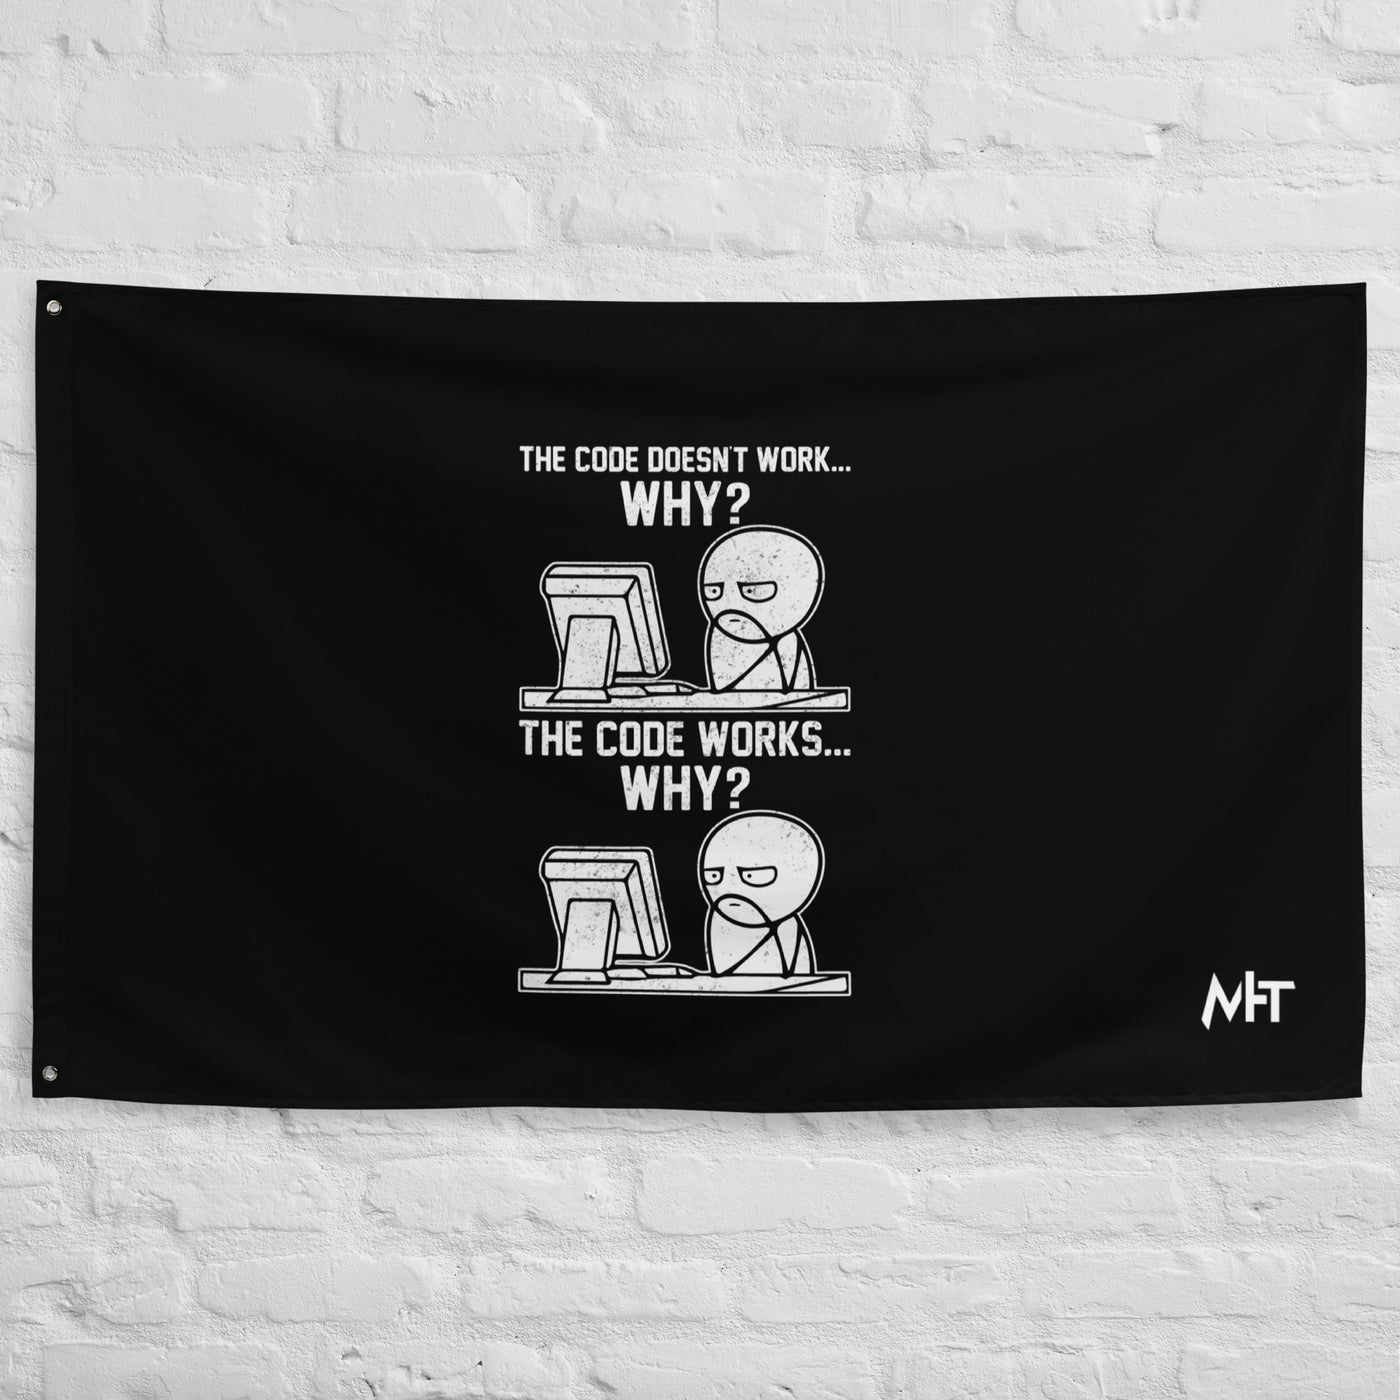 The Code doesn't work why - Flag